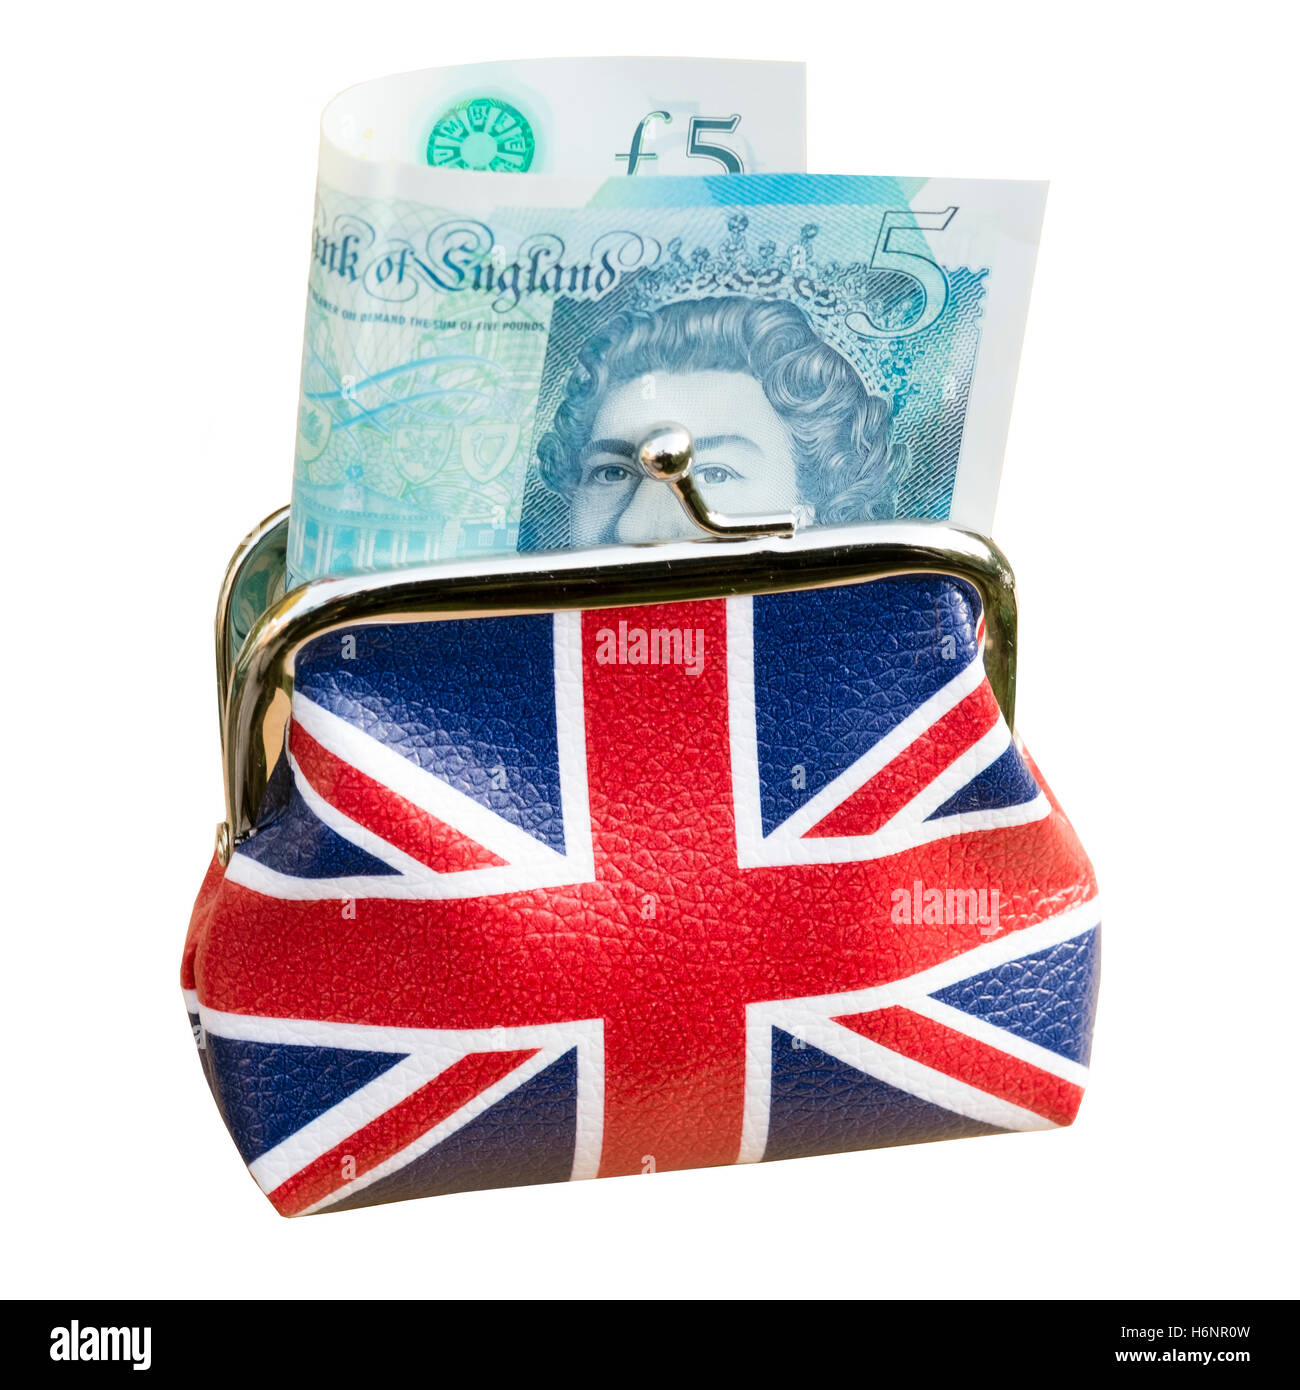 Union jack money purse with new five pound note sterling, UK. Cut out or isolated on a white background. Stock Photo